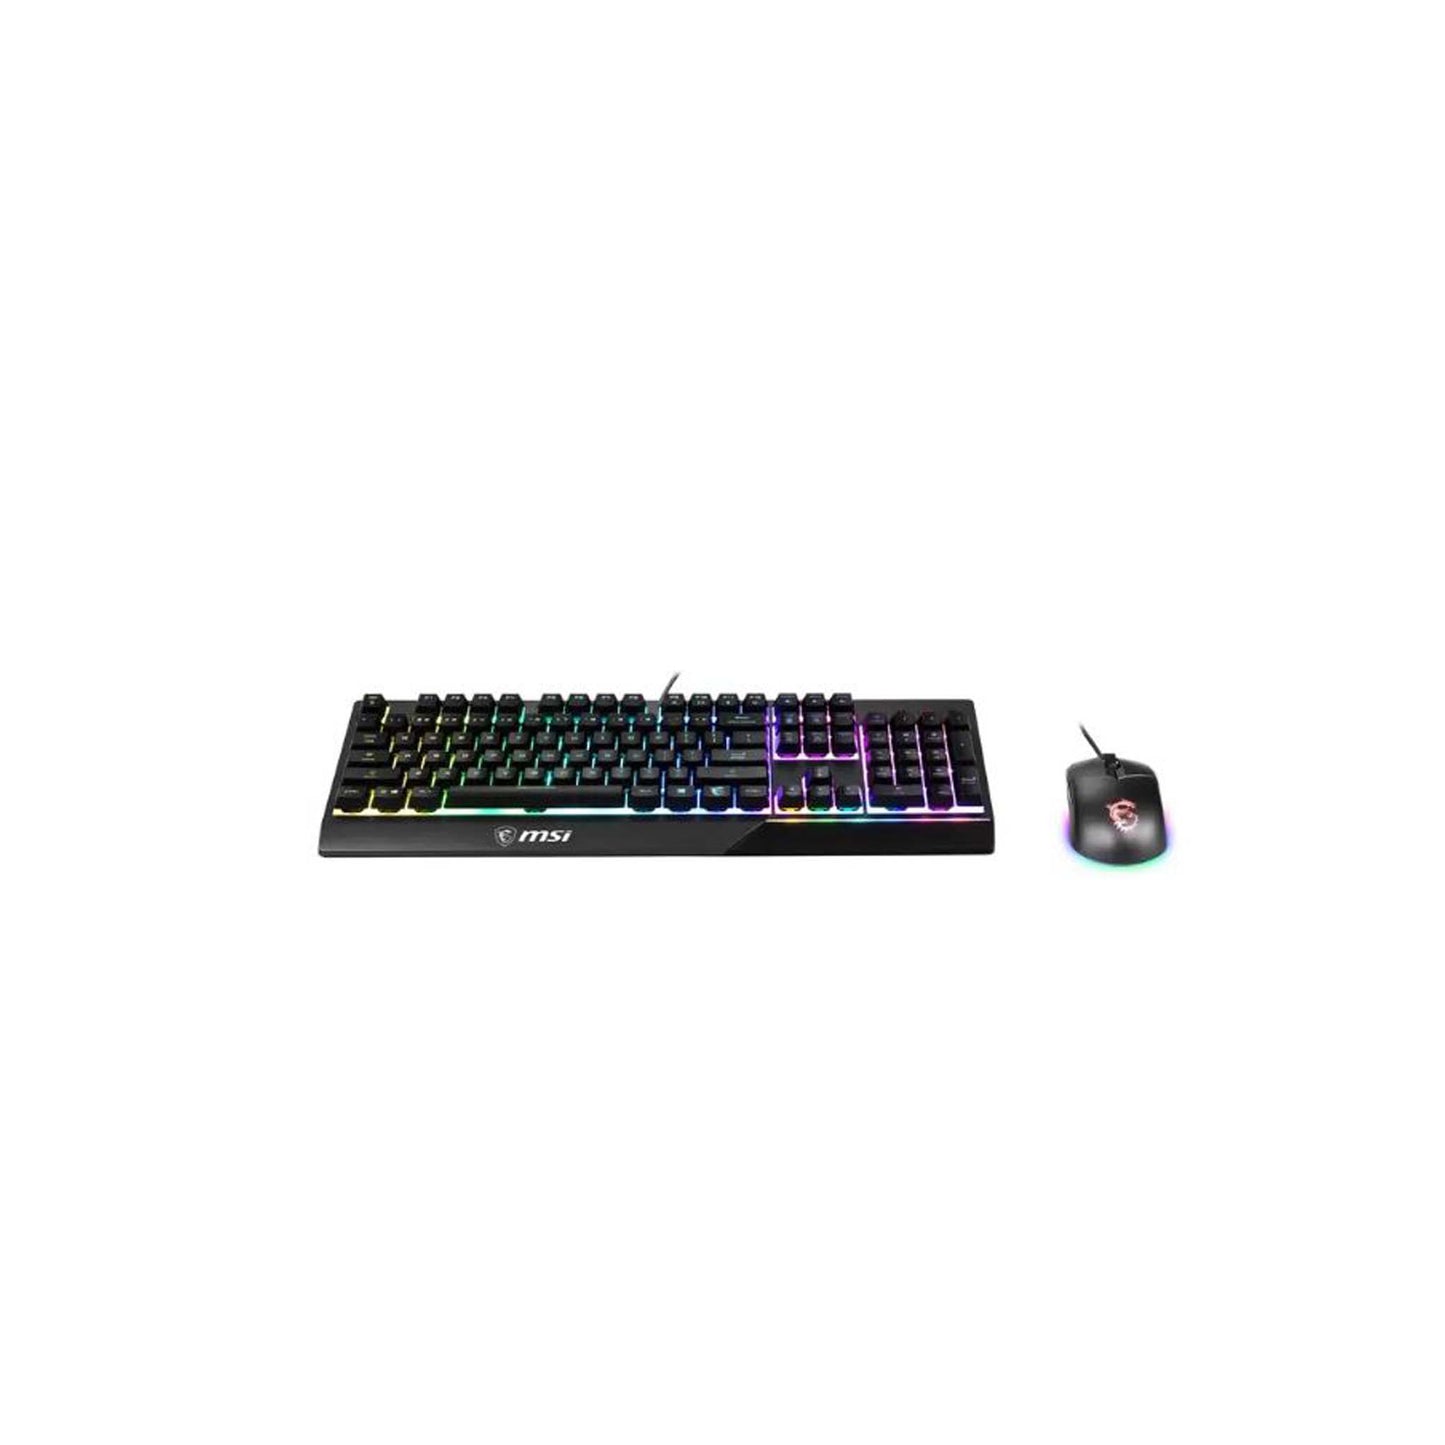 MSI Ready to Play Advanced Bundle; includes Keyboard, Mouse Mat & Headset